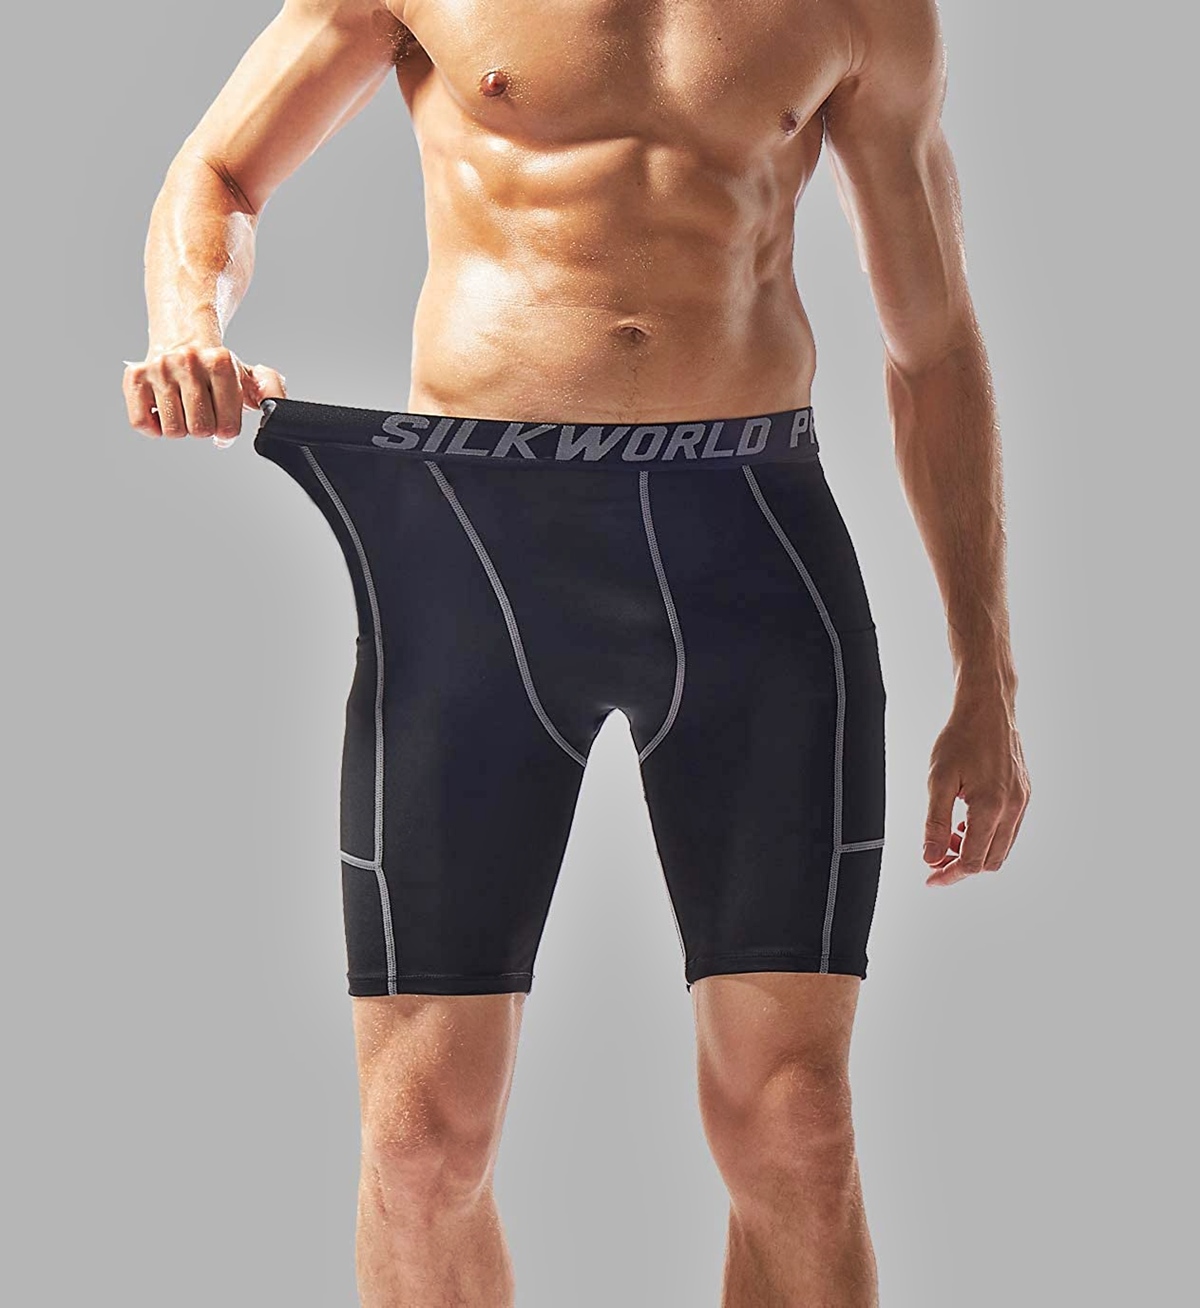 14 Amazing Men’s Running Compression Shorts For 2023